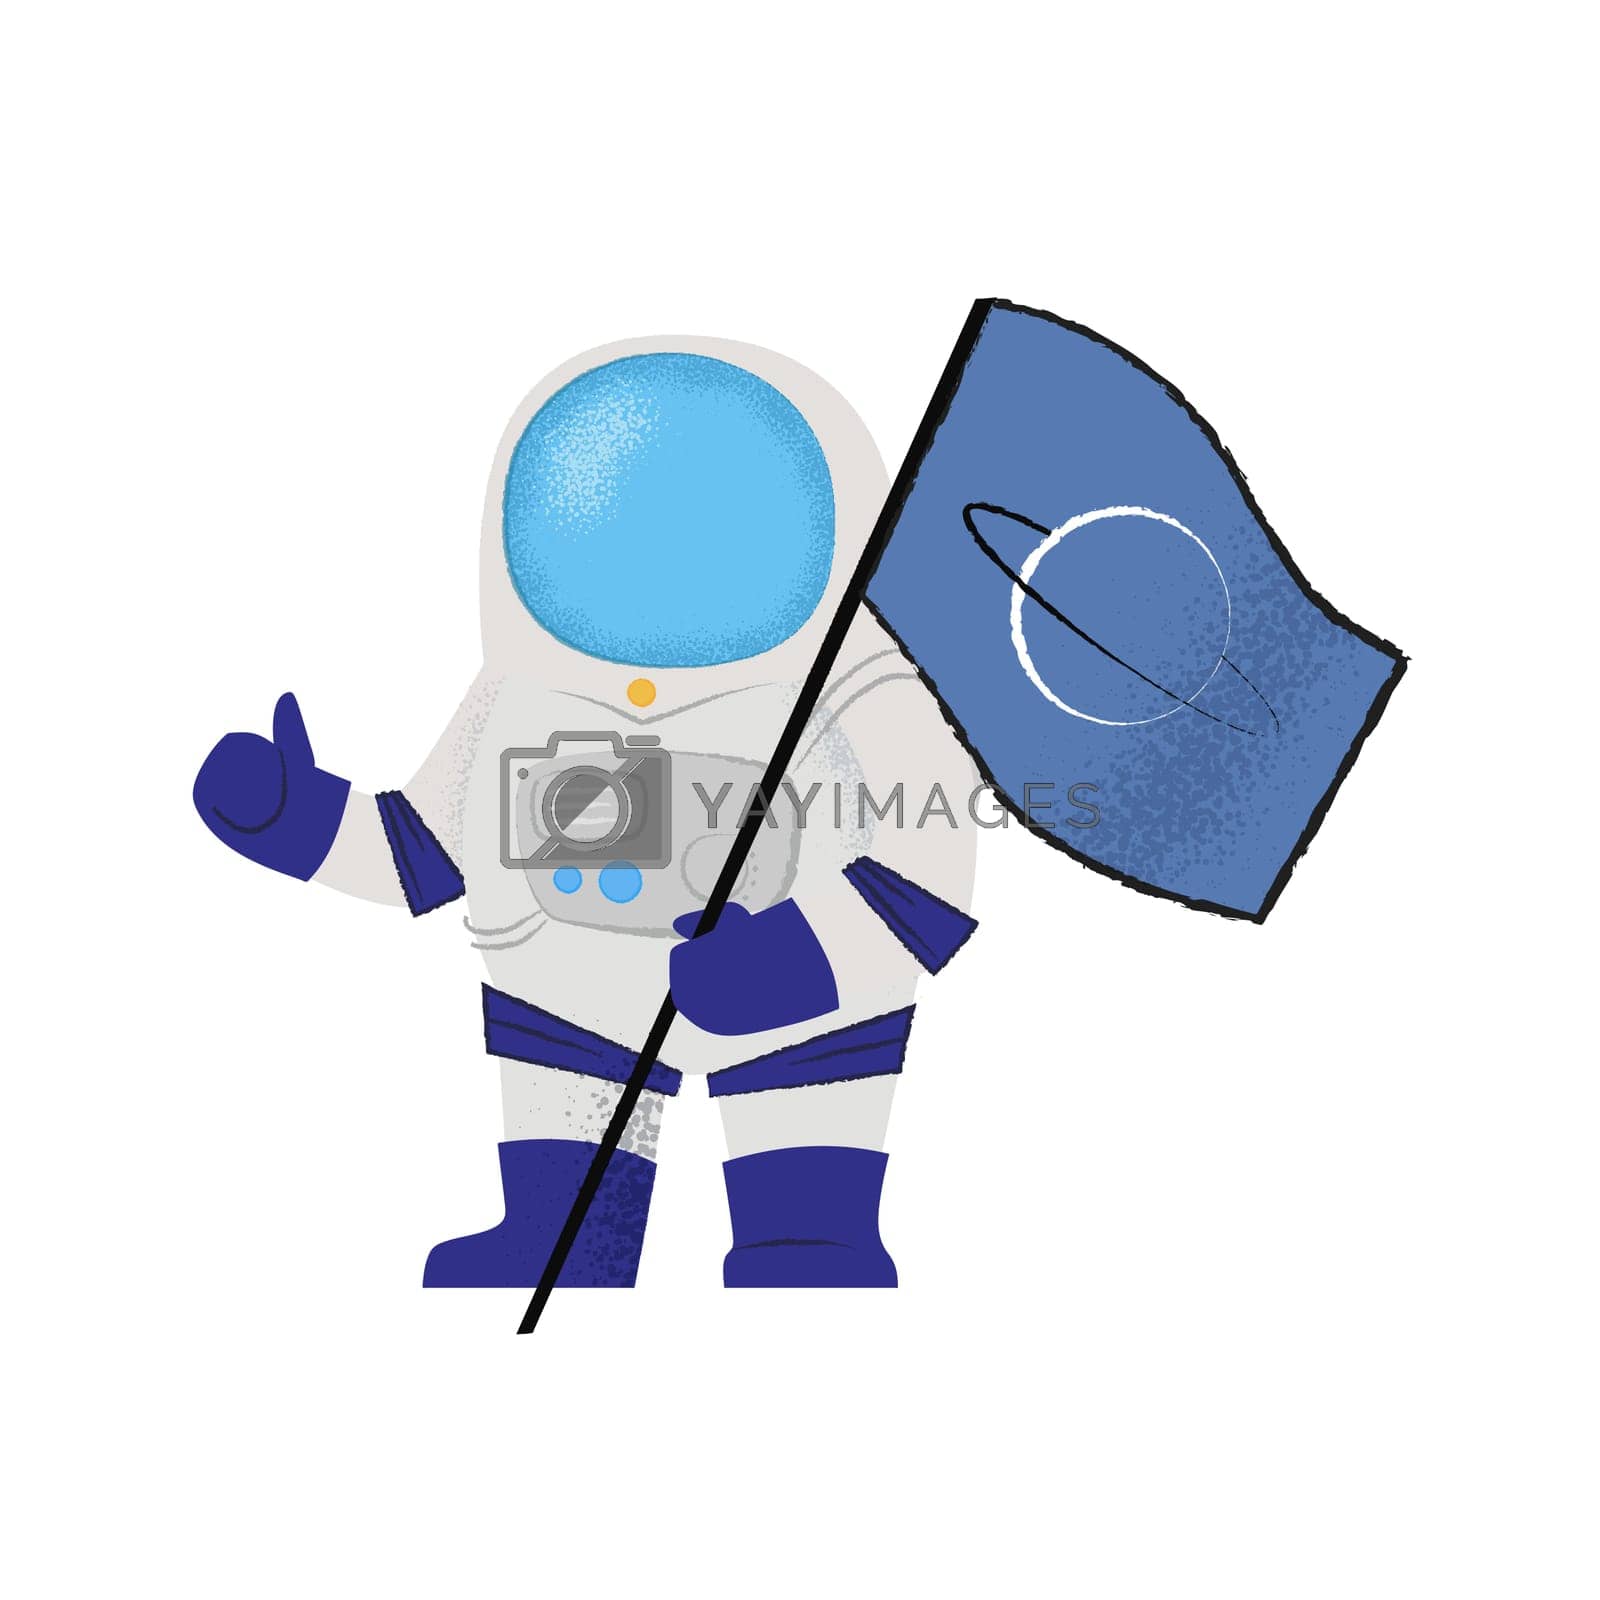 Royalty free image of Spaceman showing flag and thumbs-up by pchvector